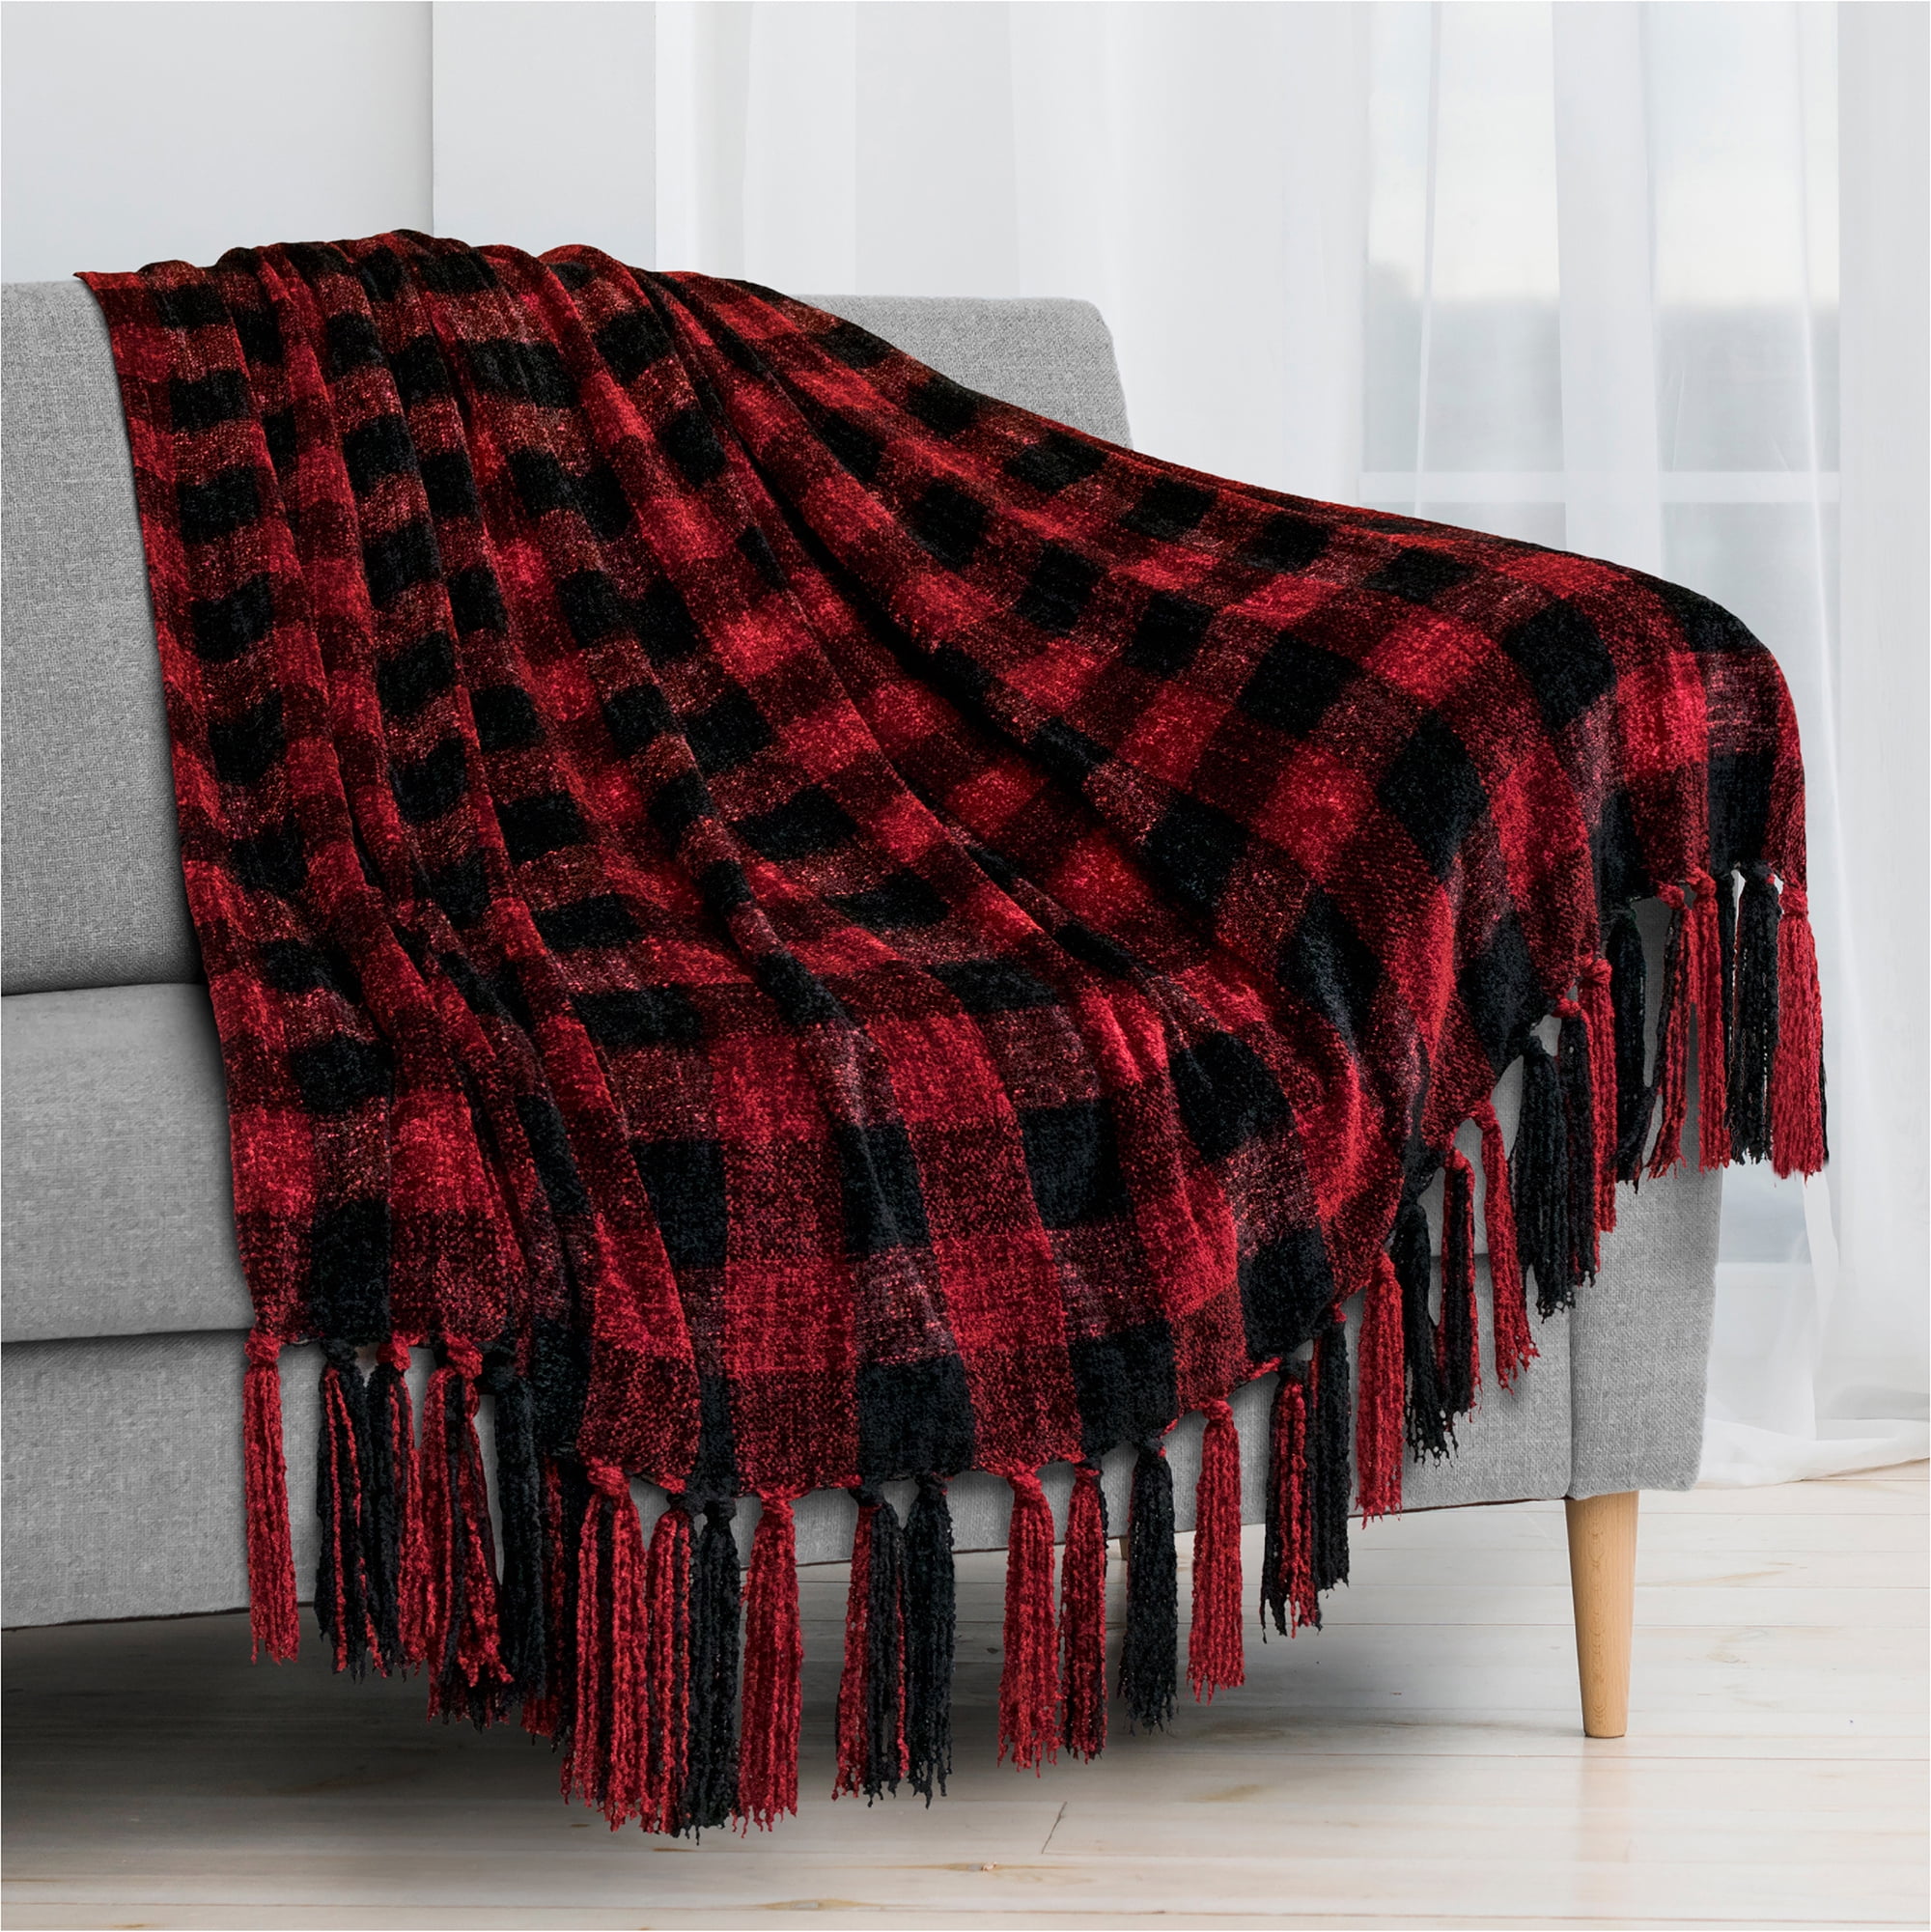 Details about   NEW VICTORIA'S SECRET PINK RED GREEN PLAID BLANKET THROW LARGE SOFT POLYESTER 